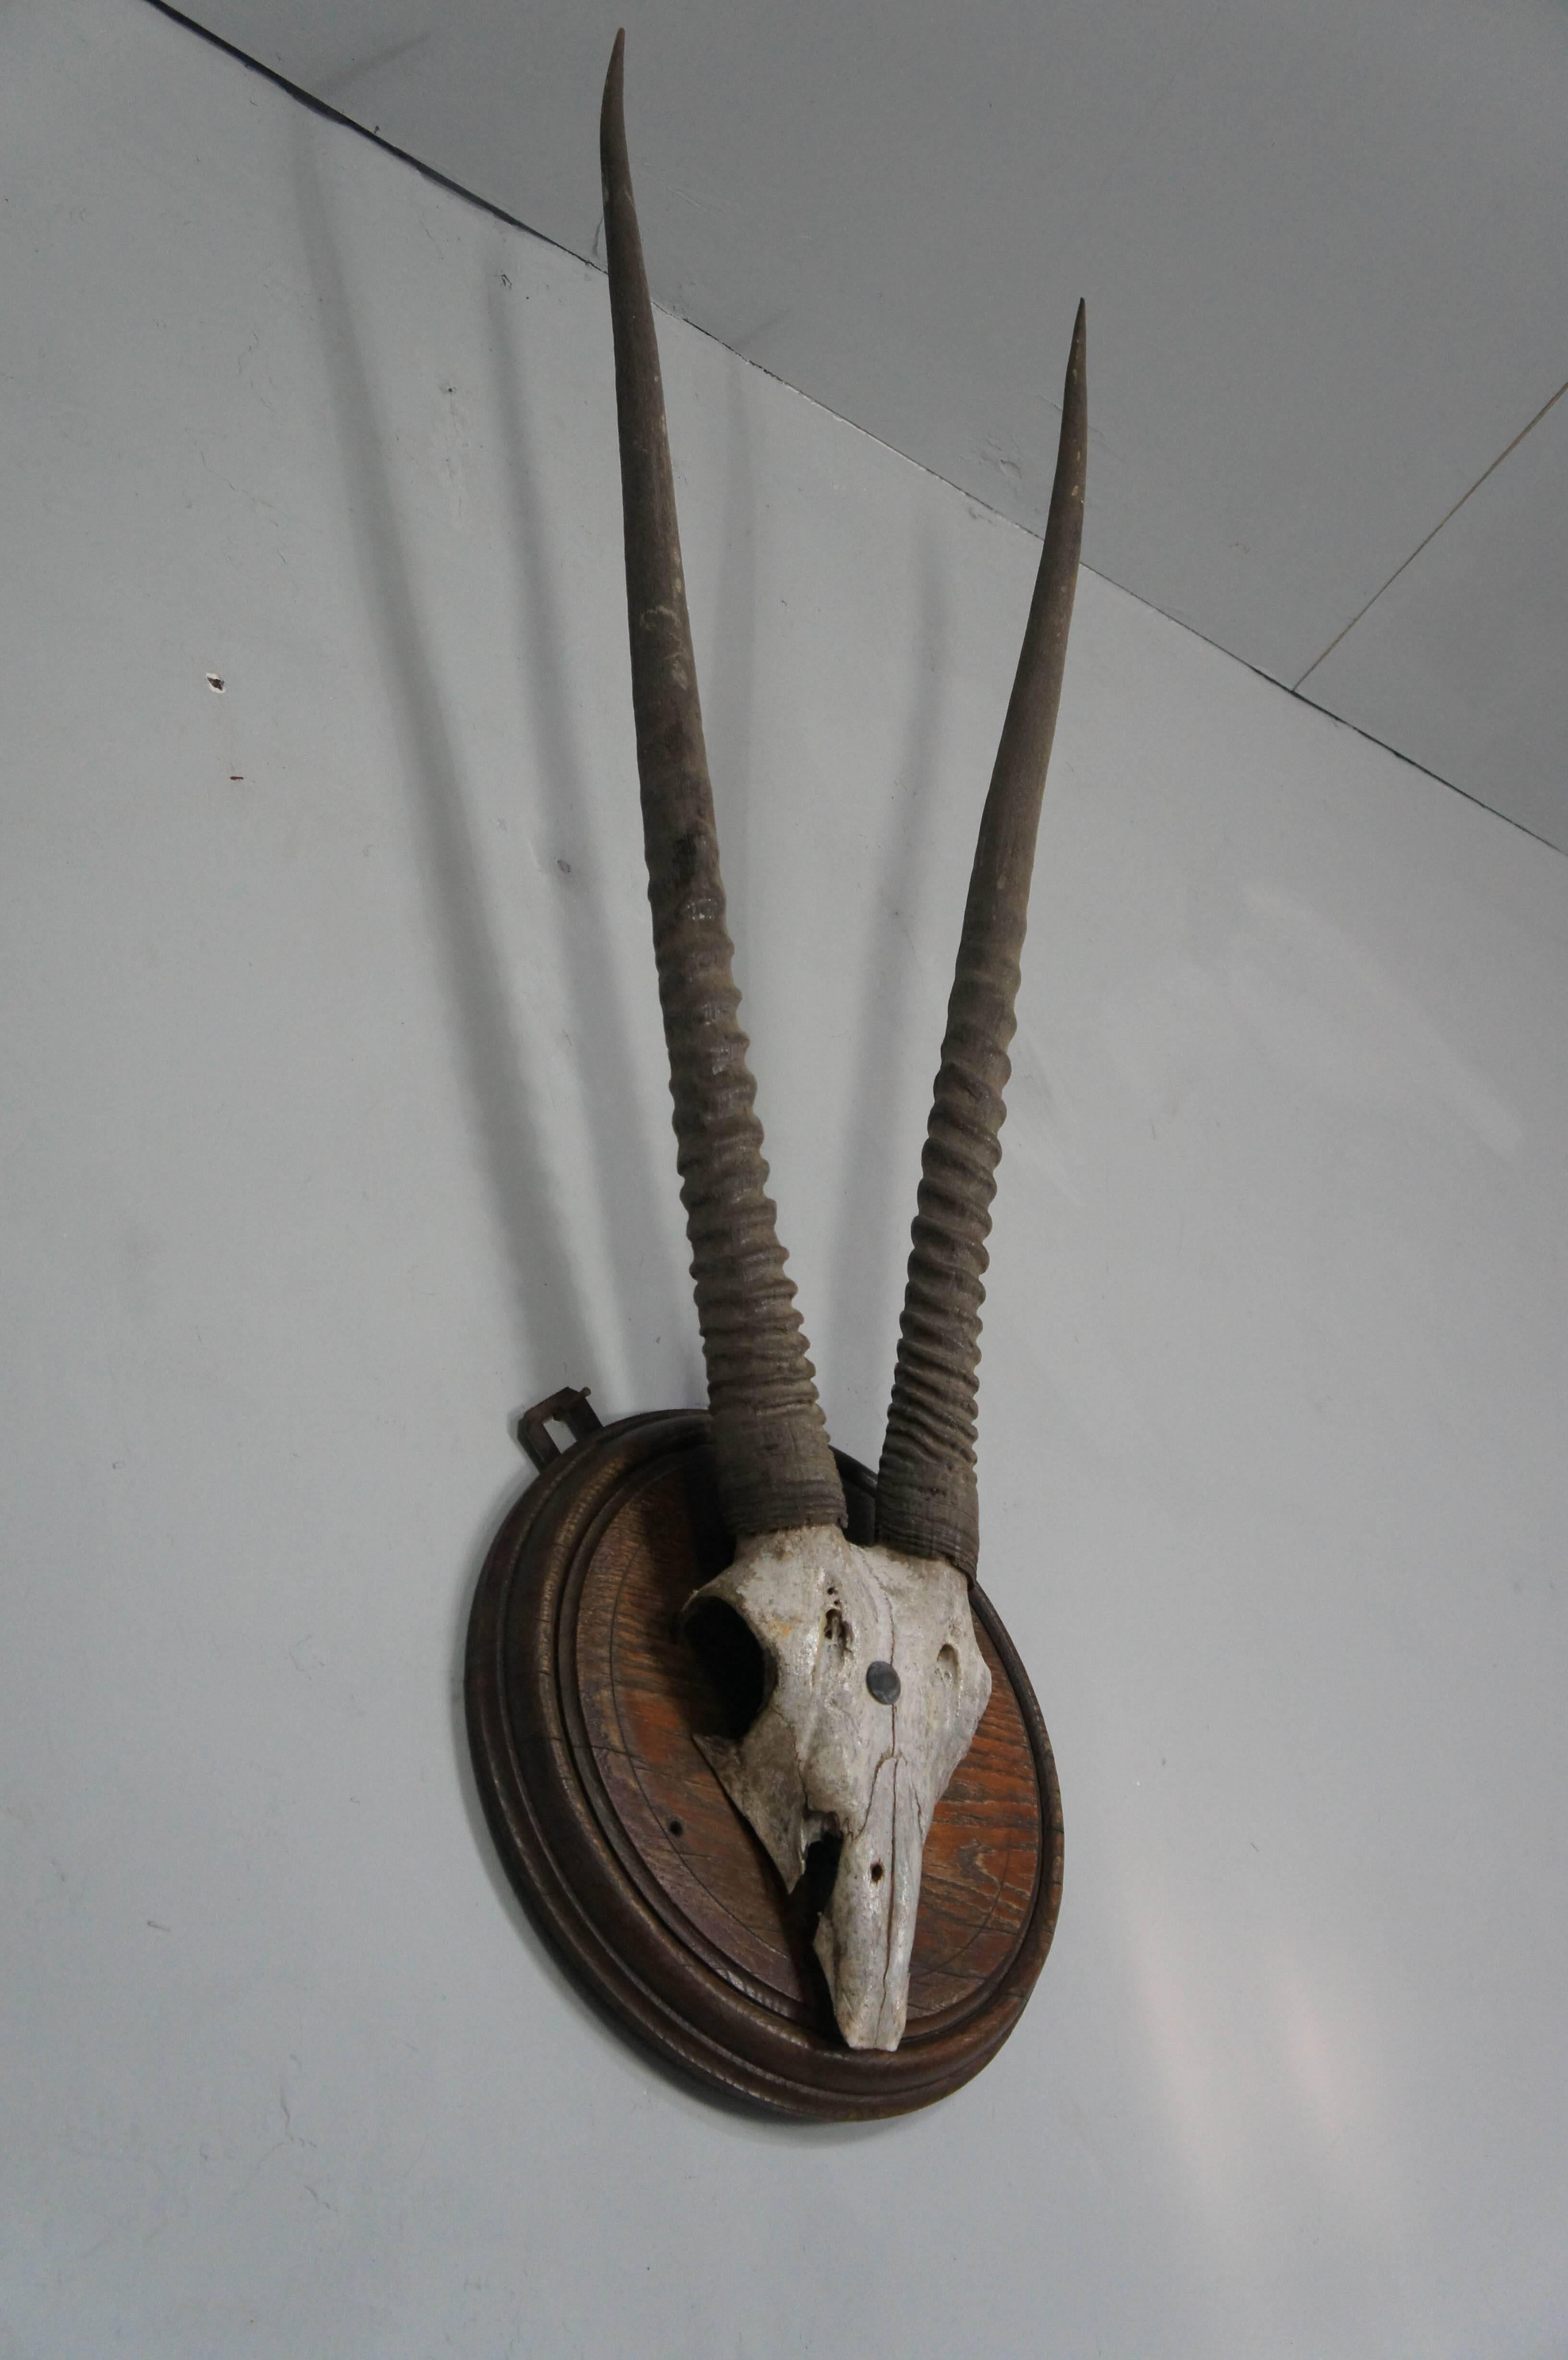 Stunning mounted Gemsbok skull and antlers, with great color and patina.
Great decorative item from the 19th century.